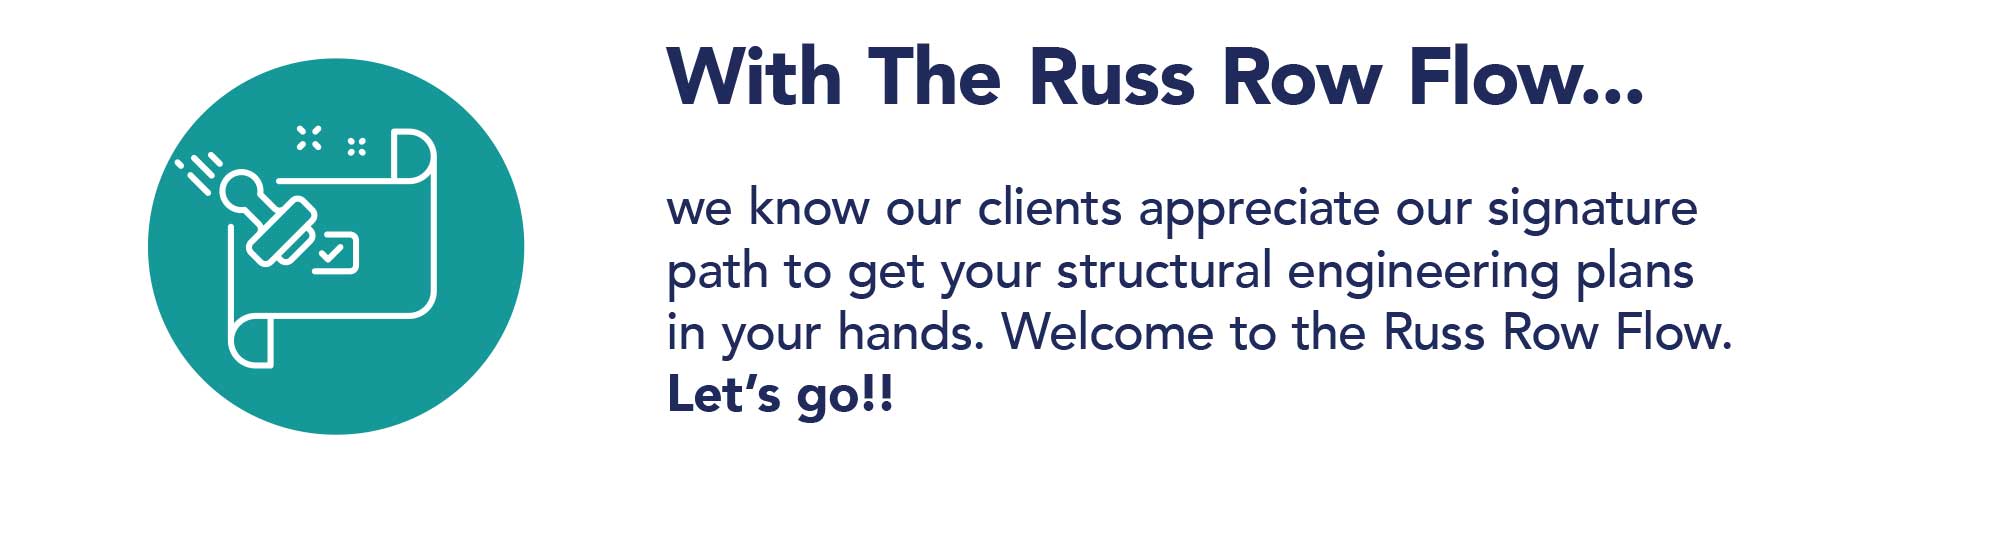 We know our clients appreciate our path to get your structural engineering plans done.